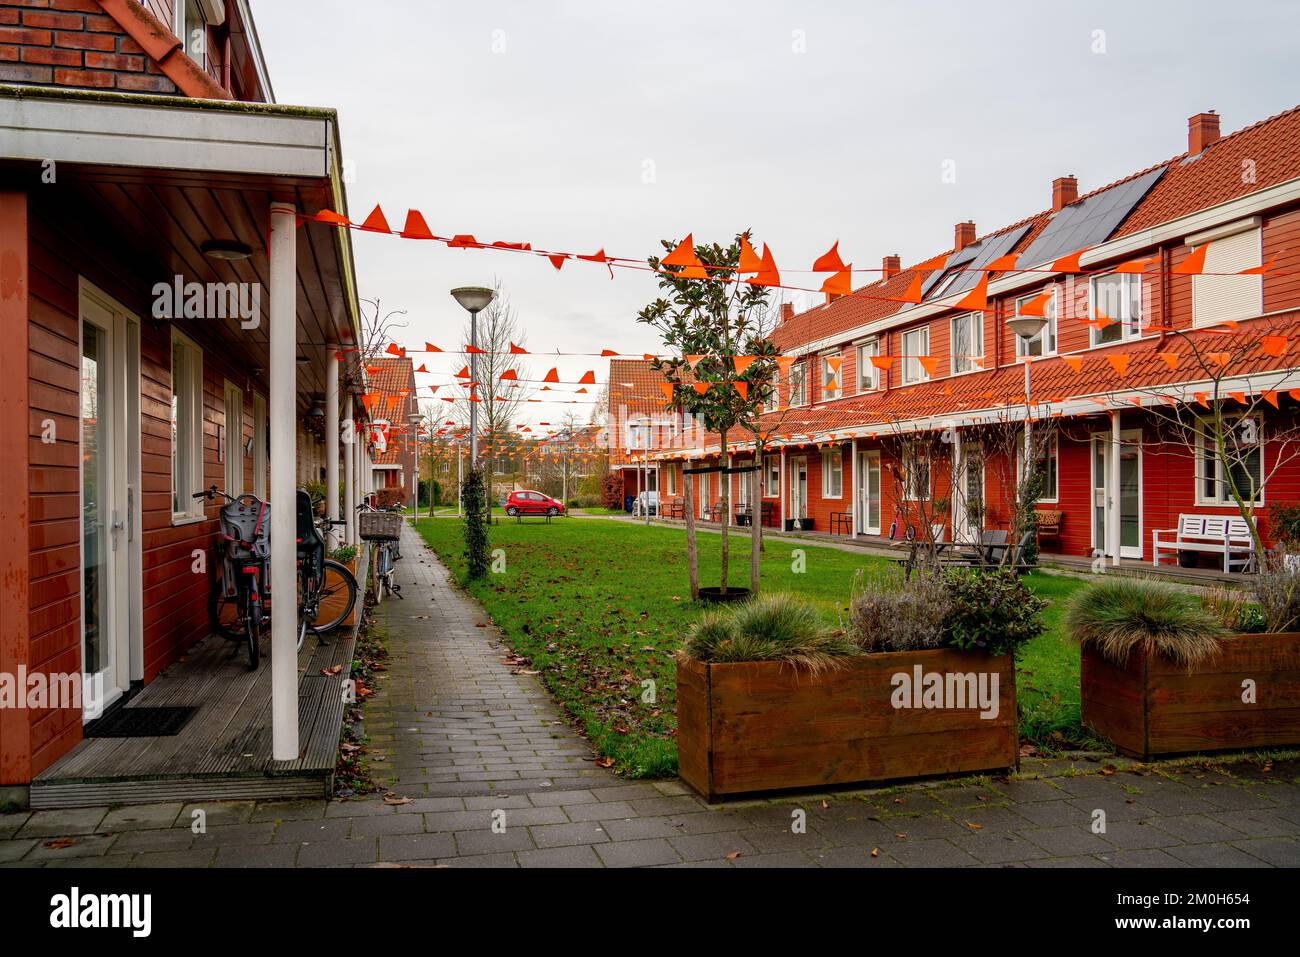 Decorated street to support the Dutch national football team in the World Championship Stock Photo